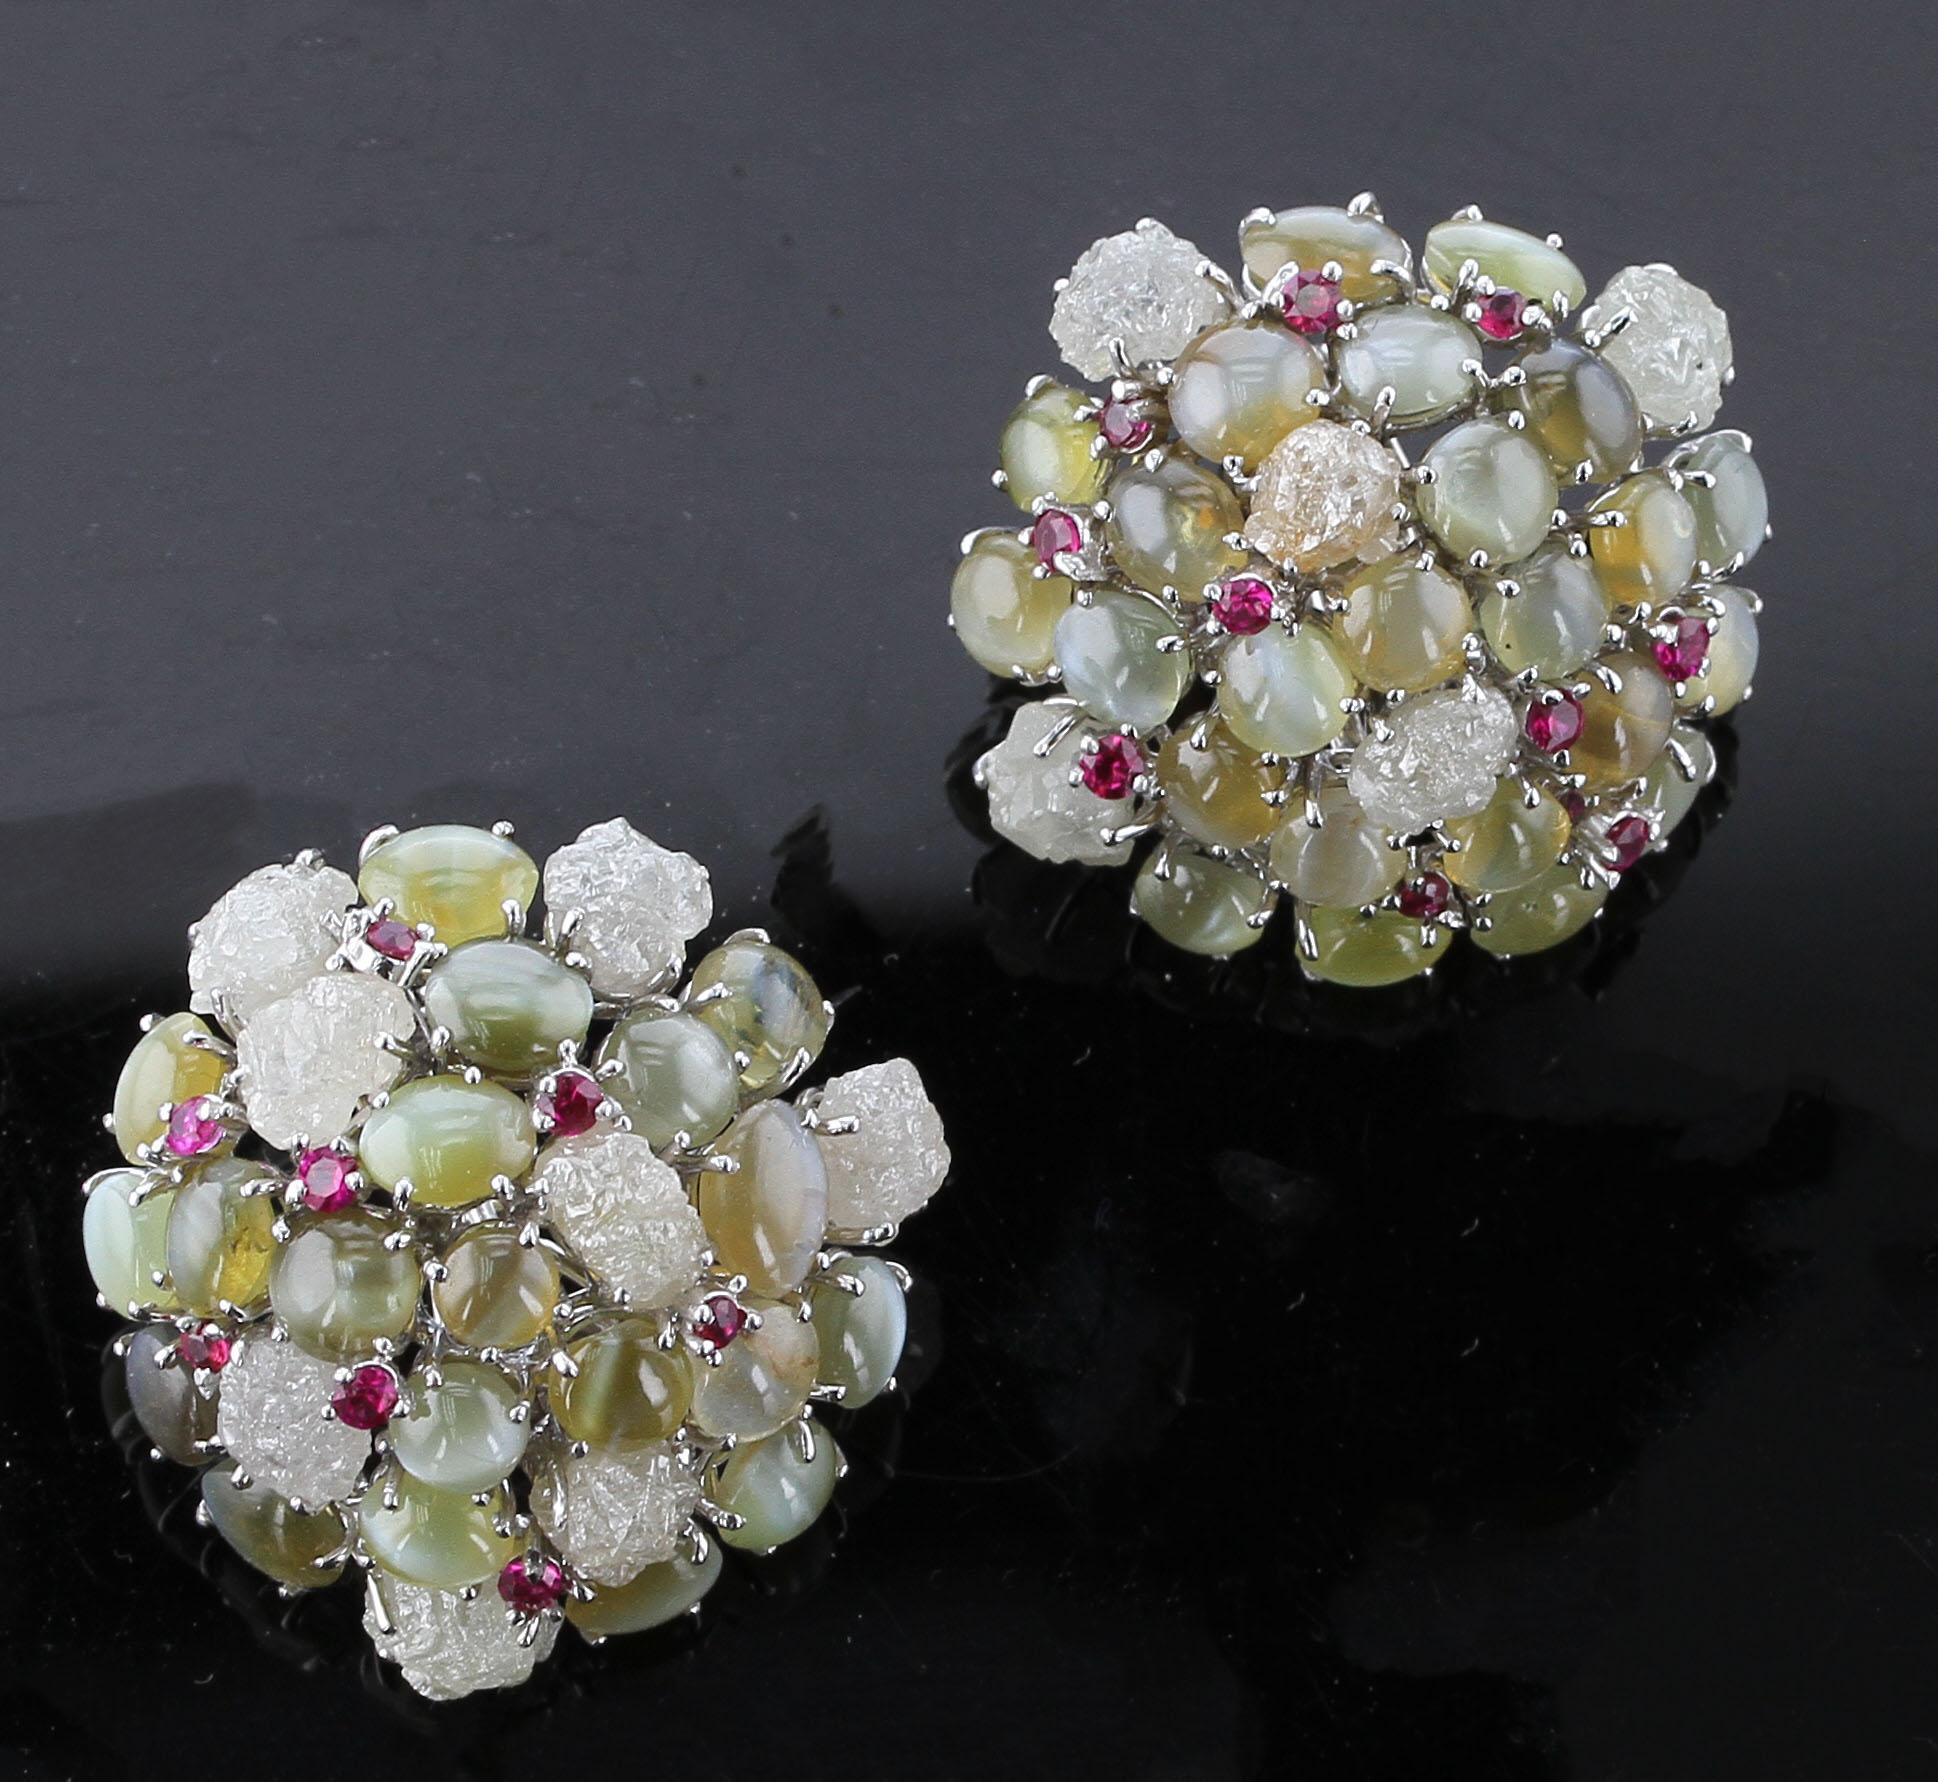 A stunning pair of earrings with Cat’s Eye Chrysoberyl (appx. 28 cts), Rubies (0.60 cts), and Rough Diamonds (31 cts) mounted in 18K White Gold. Diameter: 1.25”